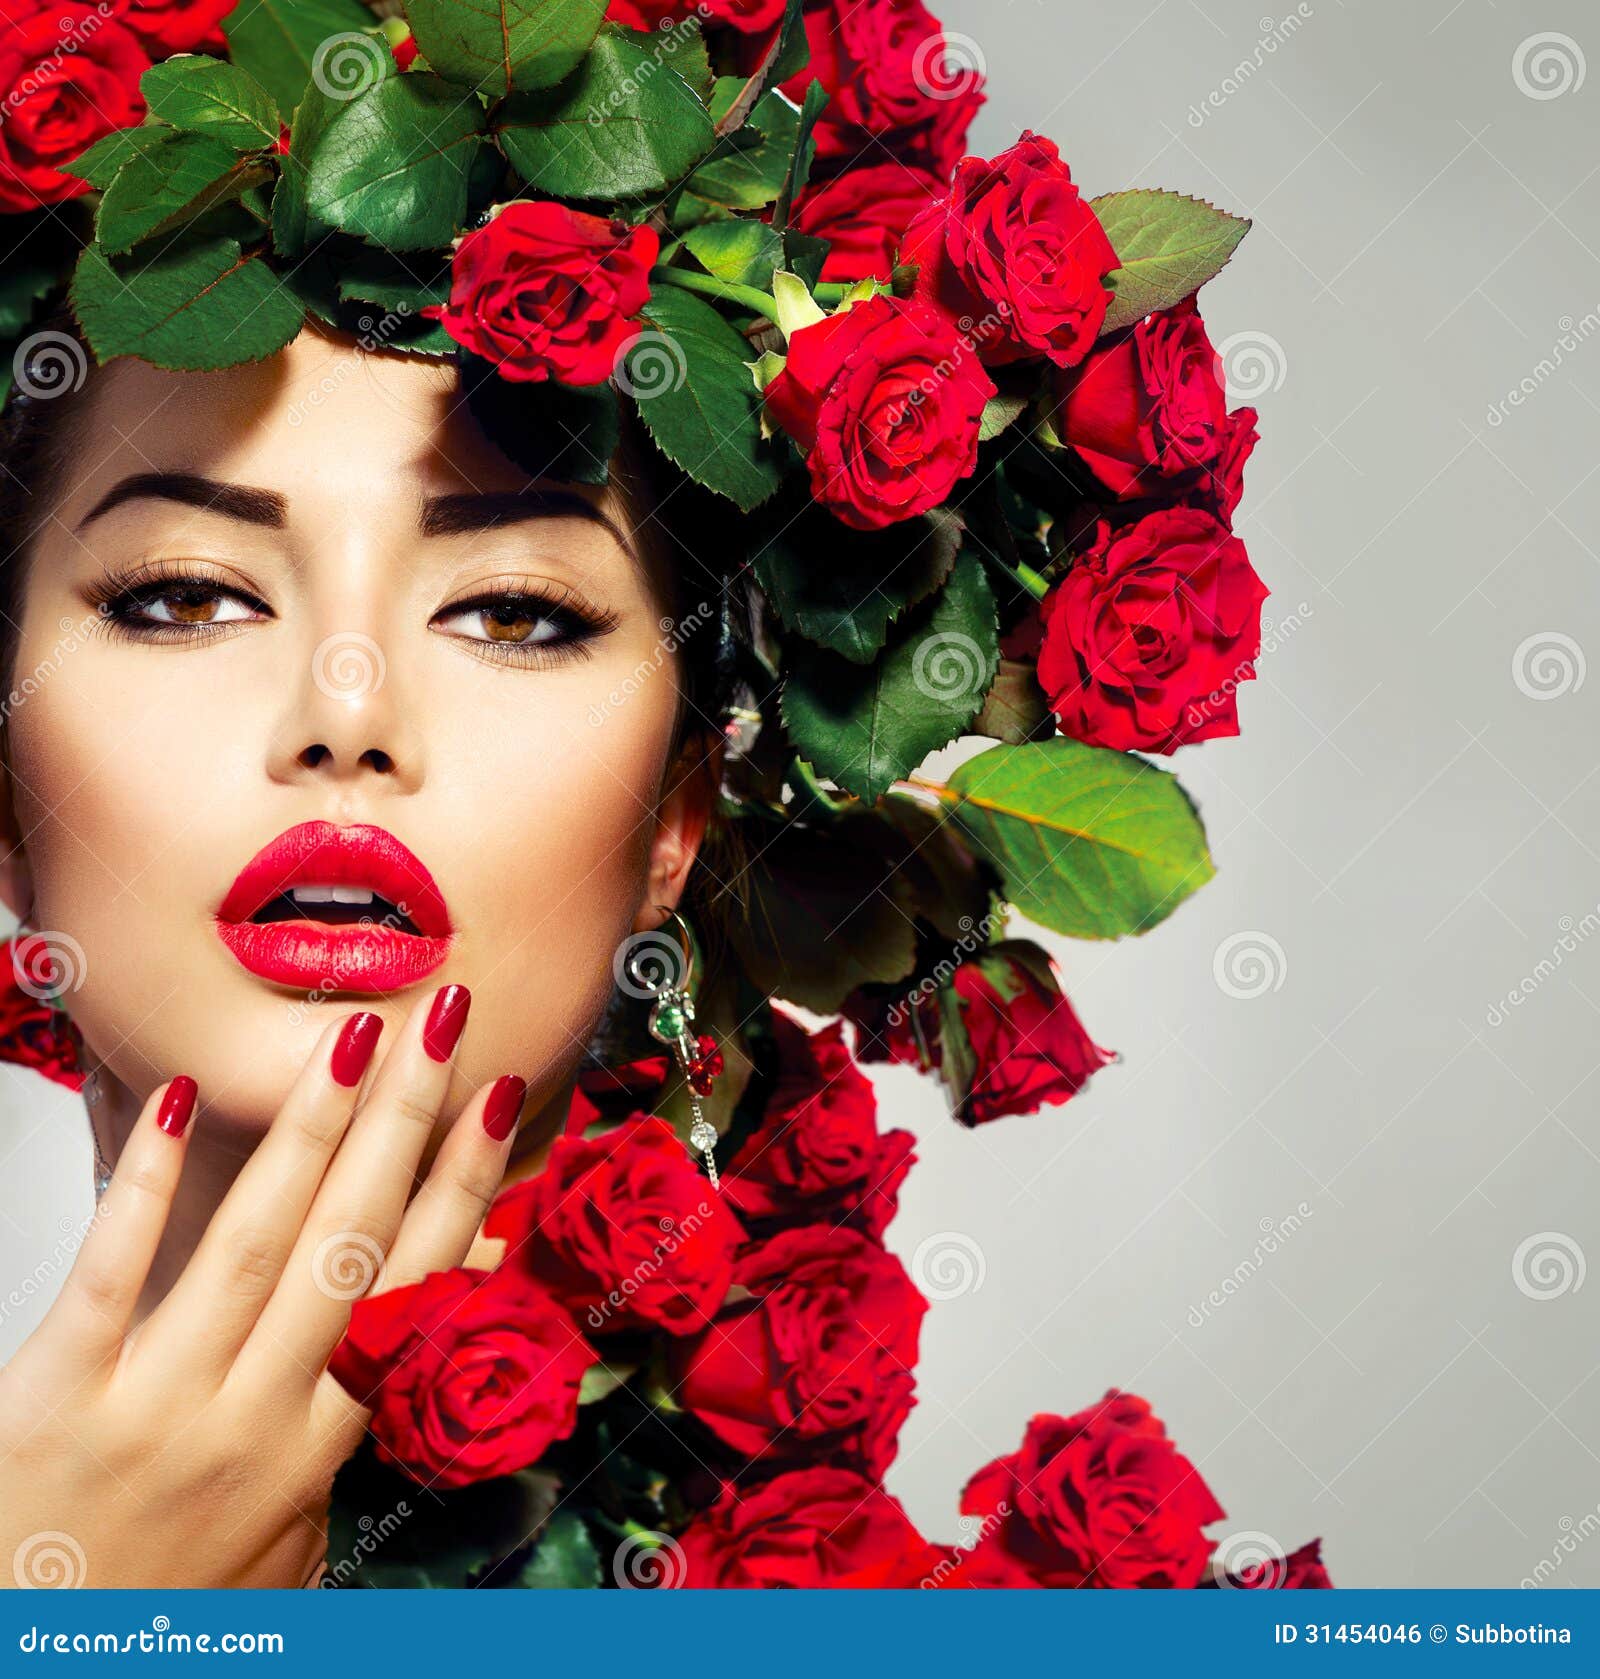 Premium Photo | Hairstyle with roses flowers woman glamour beauty portrait.  studio shot.